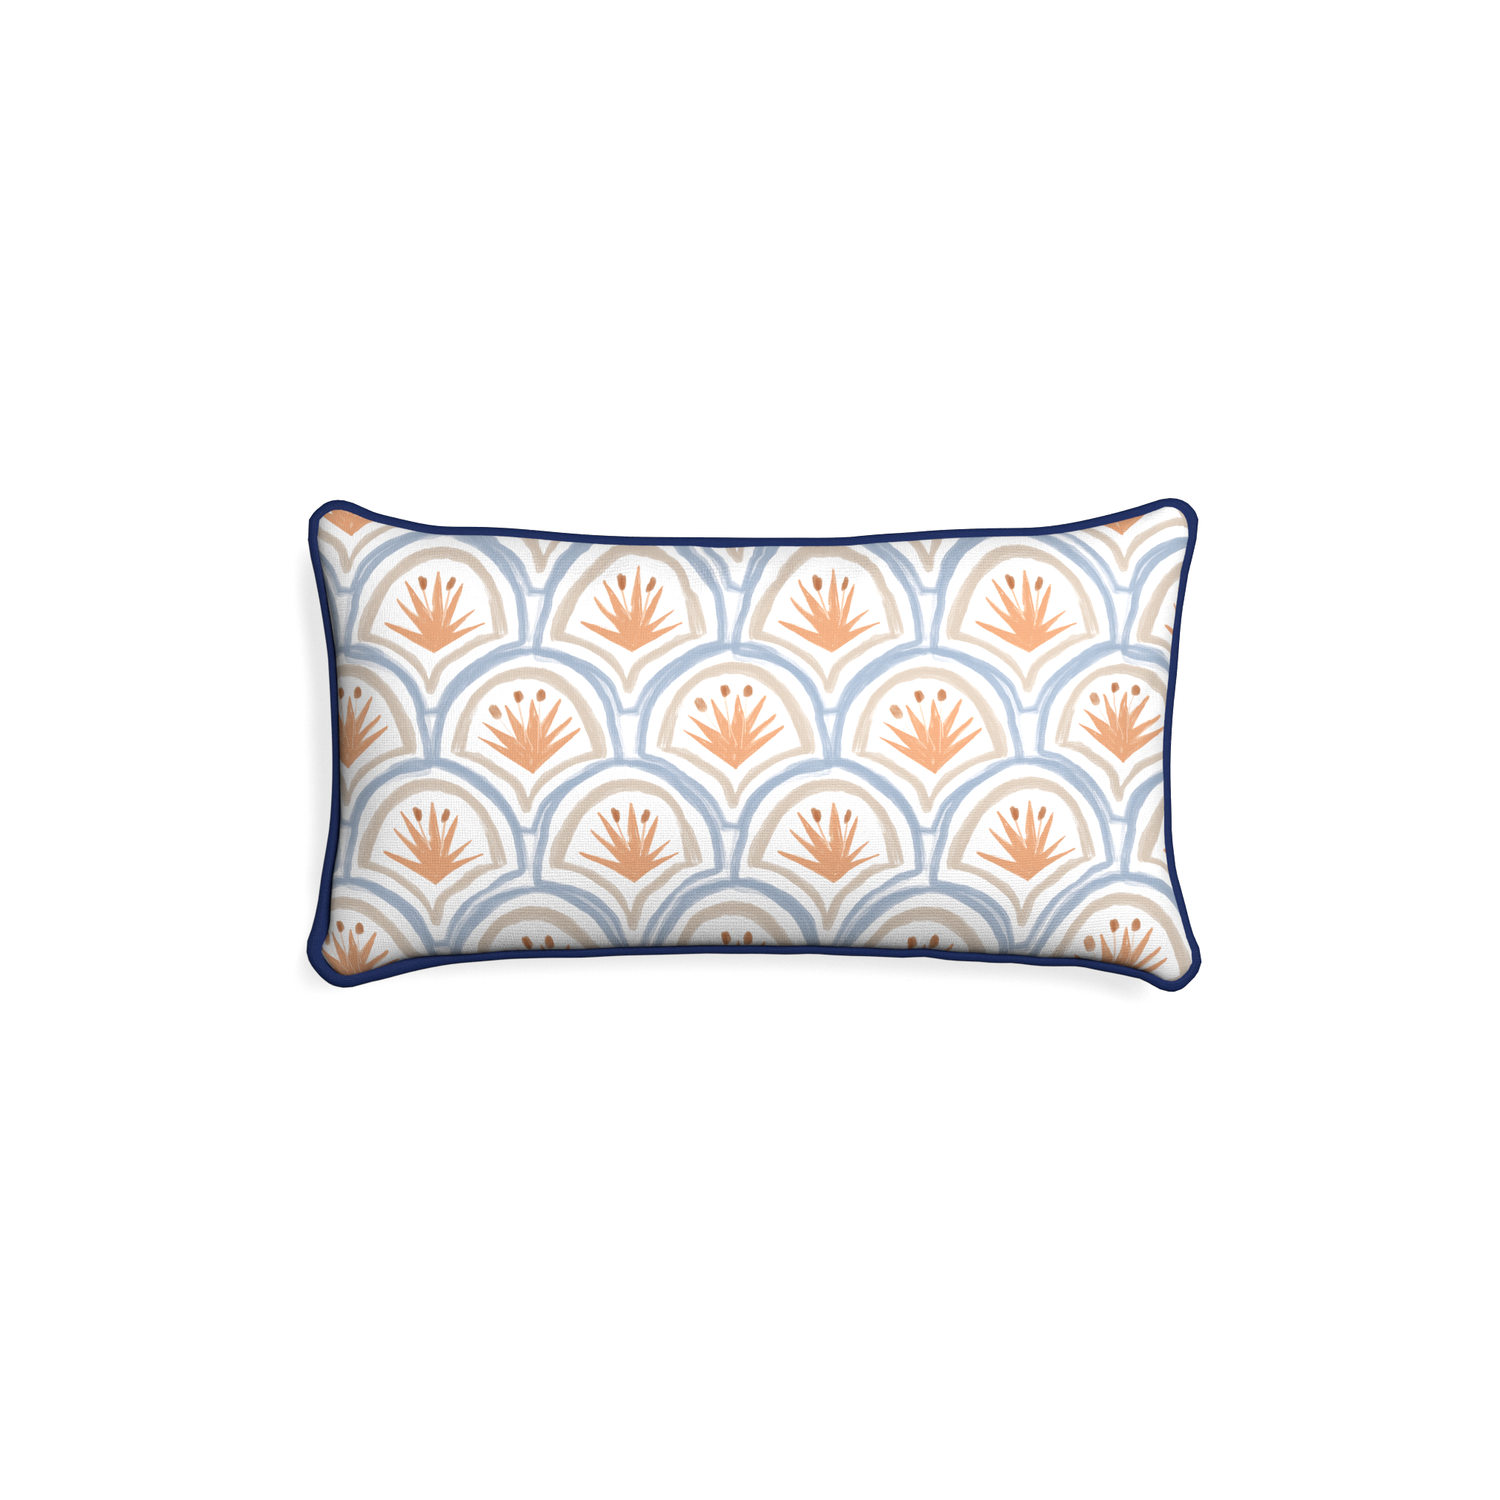 Petite-lumbar thatcher apricot custom art deco palm patternpillow with midnight piping on white background